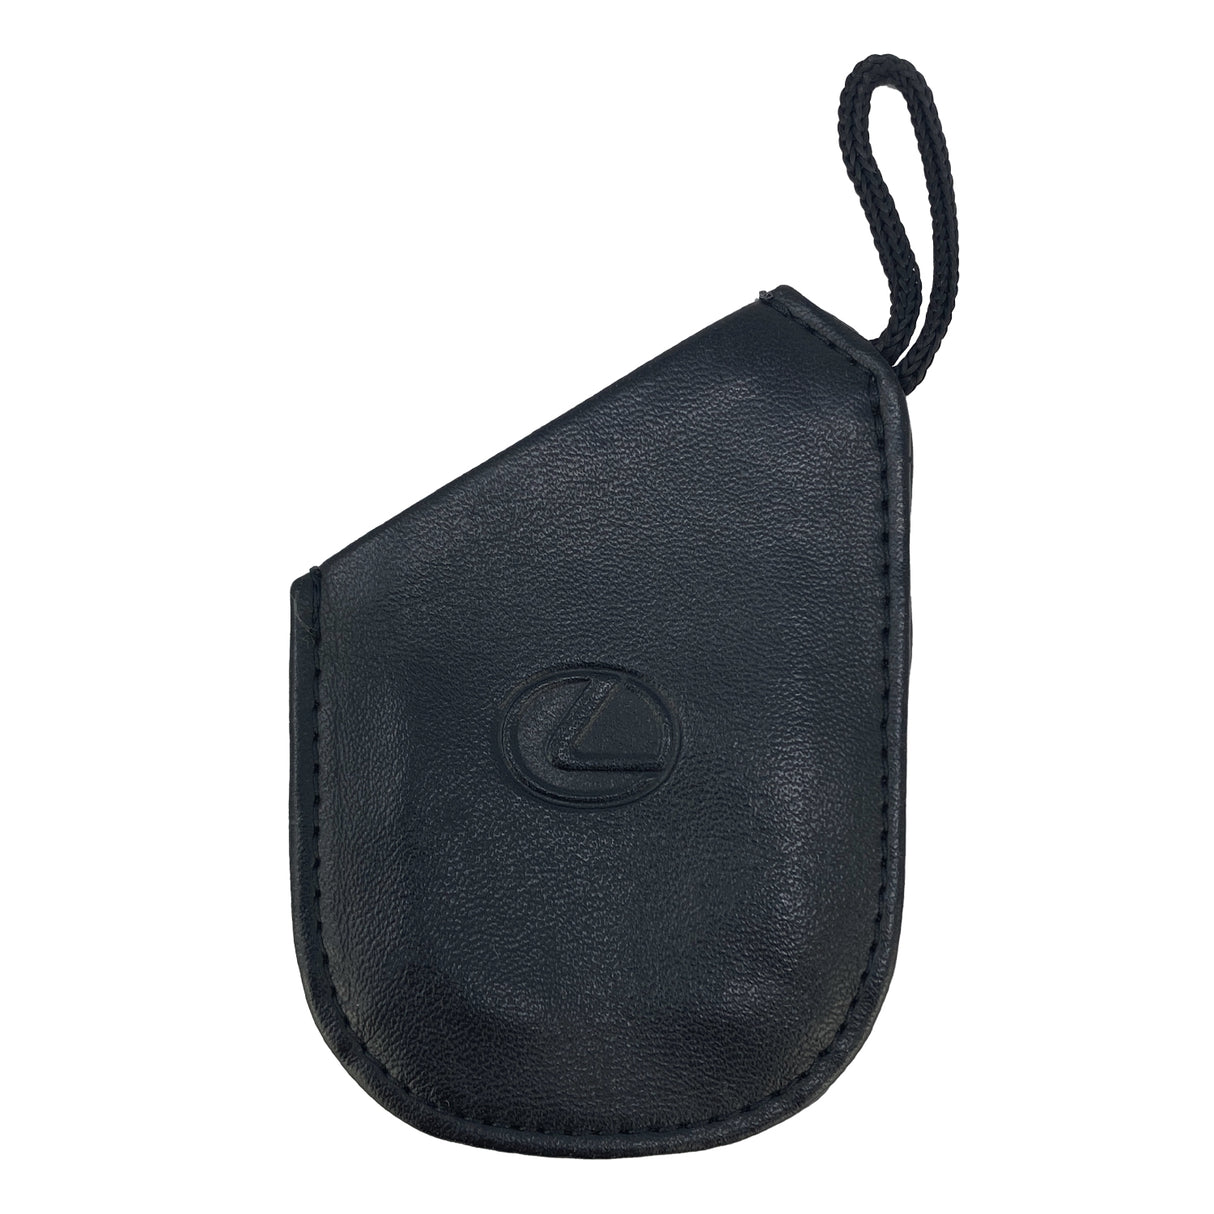 KEY COVER Lexus Smart Leather Protective Cover